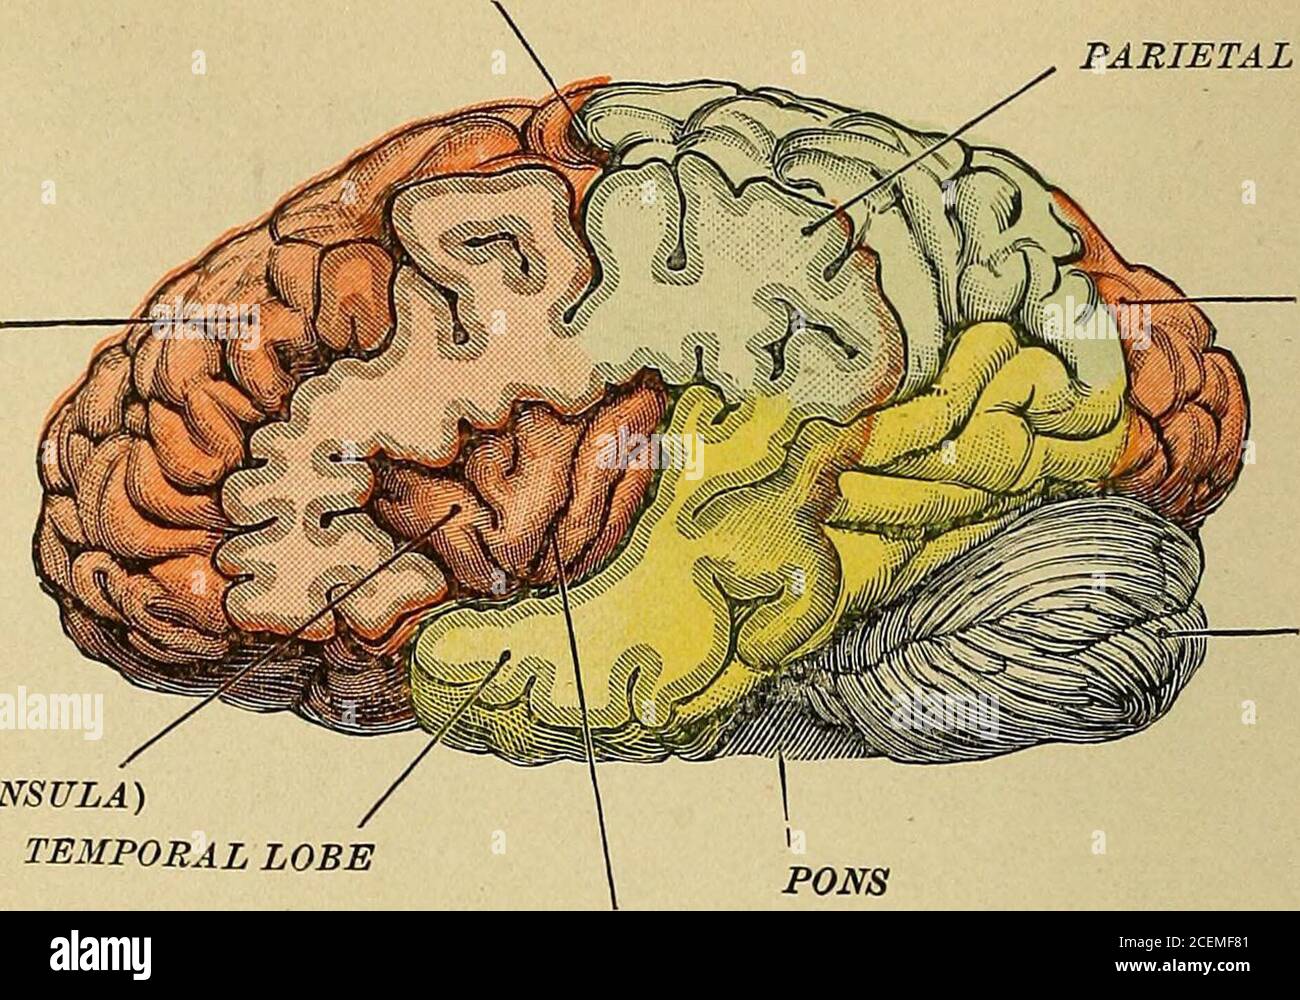 . Diseases of the nervous system : for the general practitioner and student. ecentralis inferior, n, nSul. praecentralis superior. 0. Sul. post-centralis inferior, p. Sul. post-centralis superior, q.Ramus horizontals and r, ramus occipitalis of interparietal sulcus. 5. Sul. transversus. /.Sulci superior and lateralis, u. Incisura prasoccipitalis. v. Sul. temporalis superior, w. SuLtemporalis medius. Interior of the Brain.—A horizontal section through both hemispheresreveals the presence of gray and white matter, also of lateral ventricles. Gray Substance.—Besides the cortical gray matter there Stock Photo